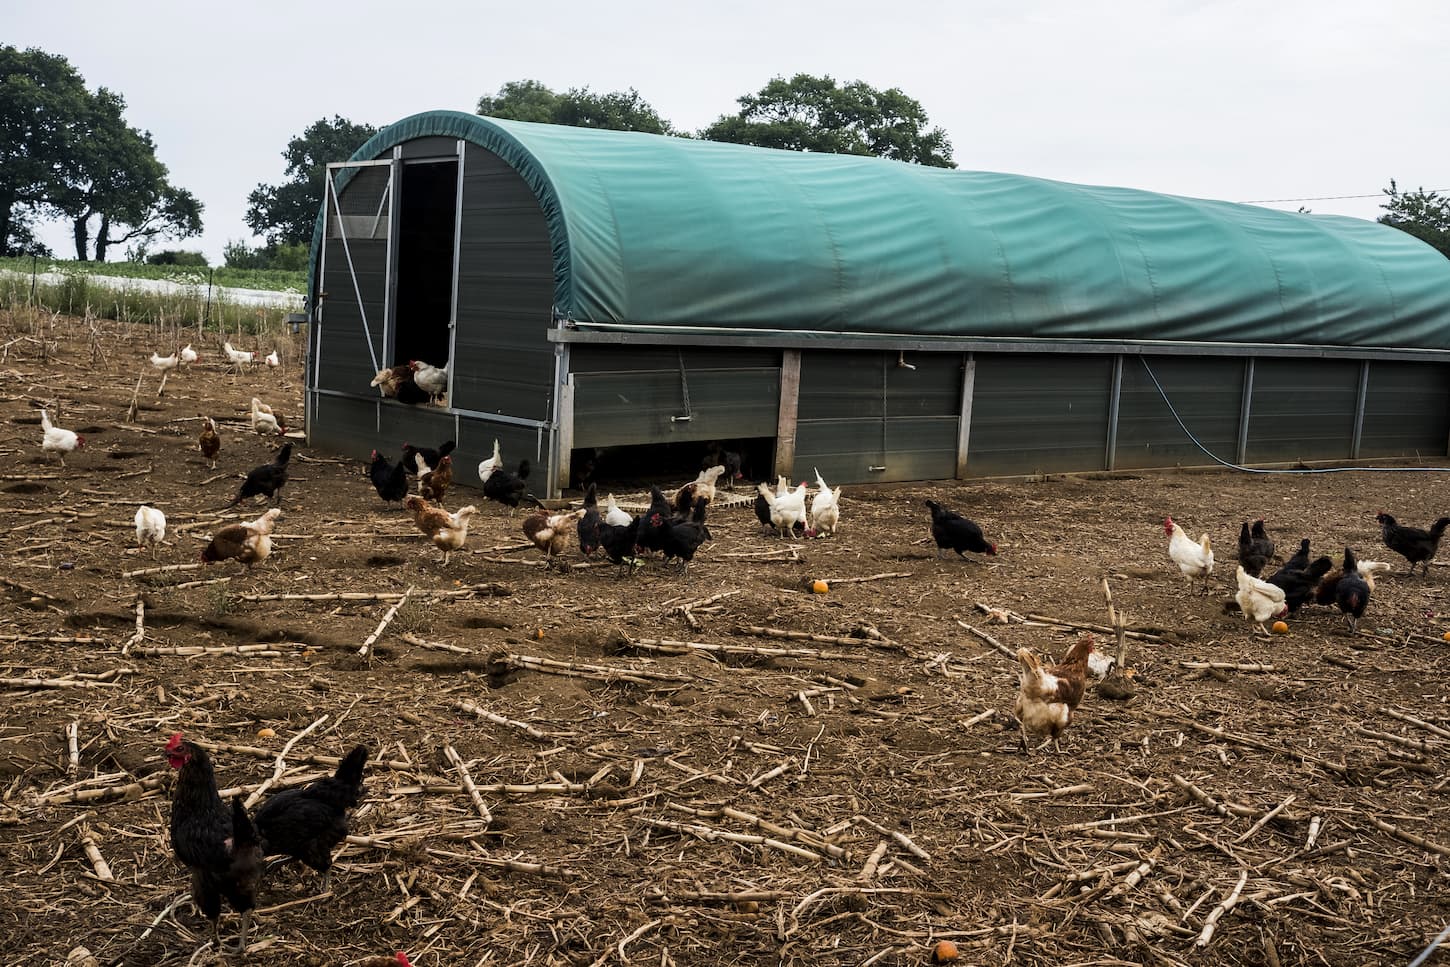 An image of flock of chickens around a chicken coop on a farm.